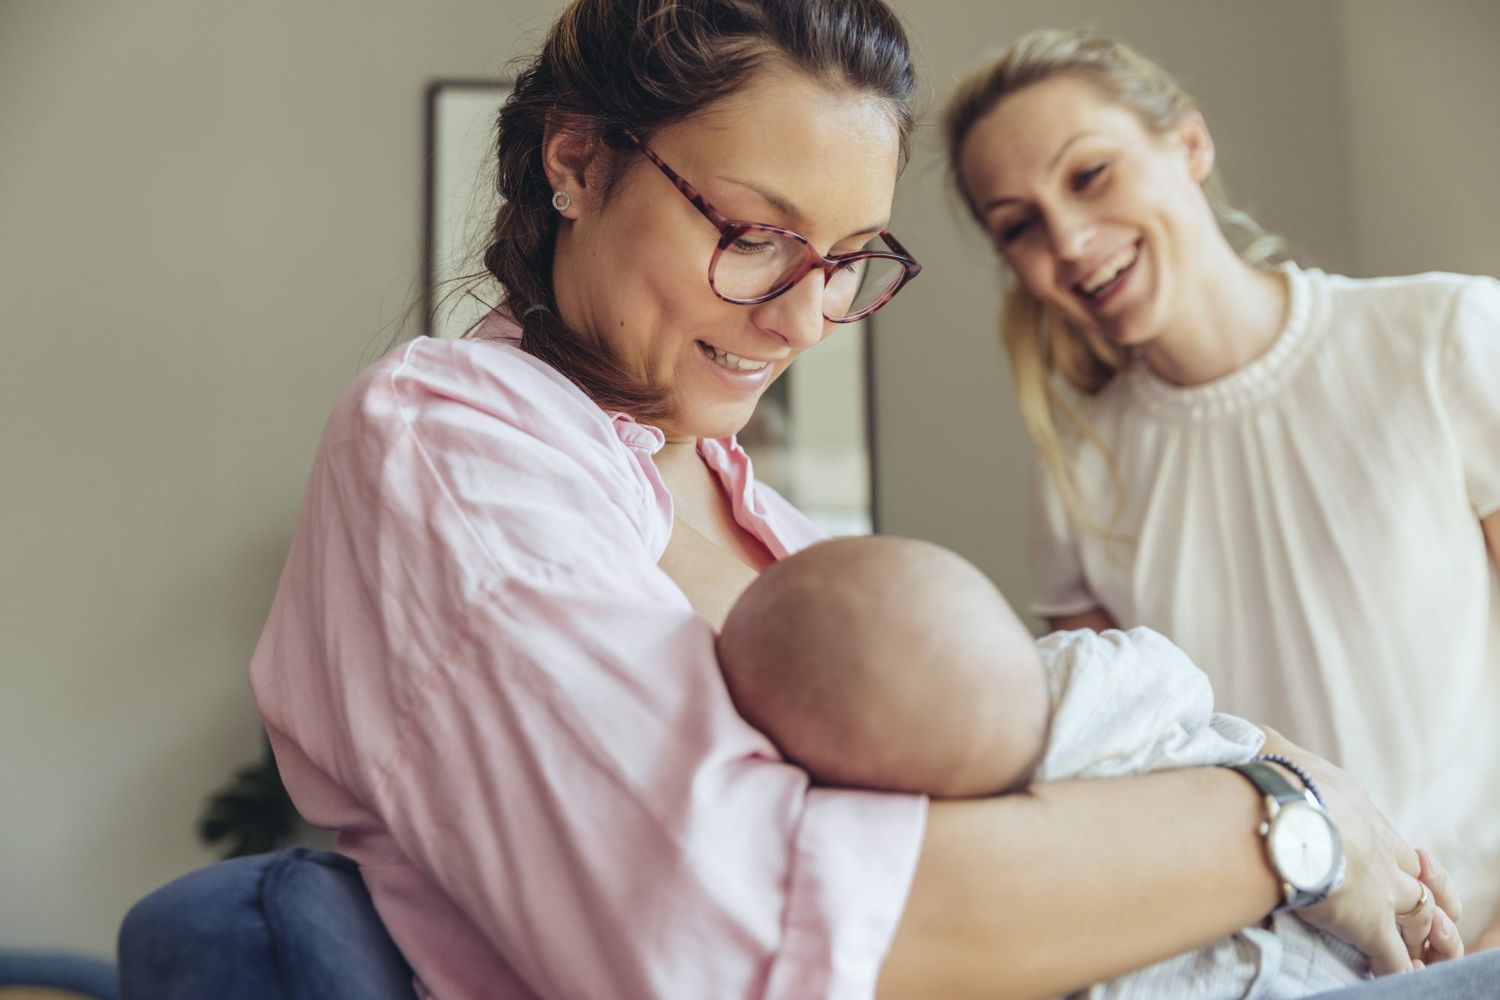 lactation consultant supporting a breastfeeding mother with her newborn baby